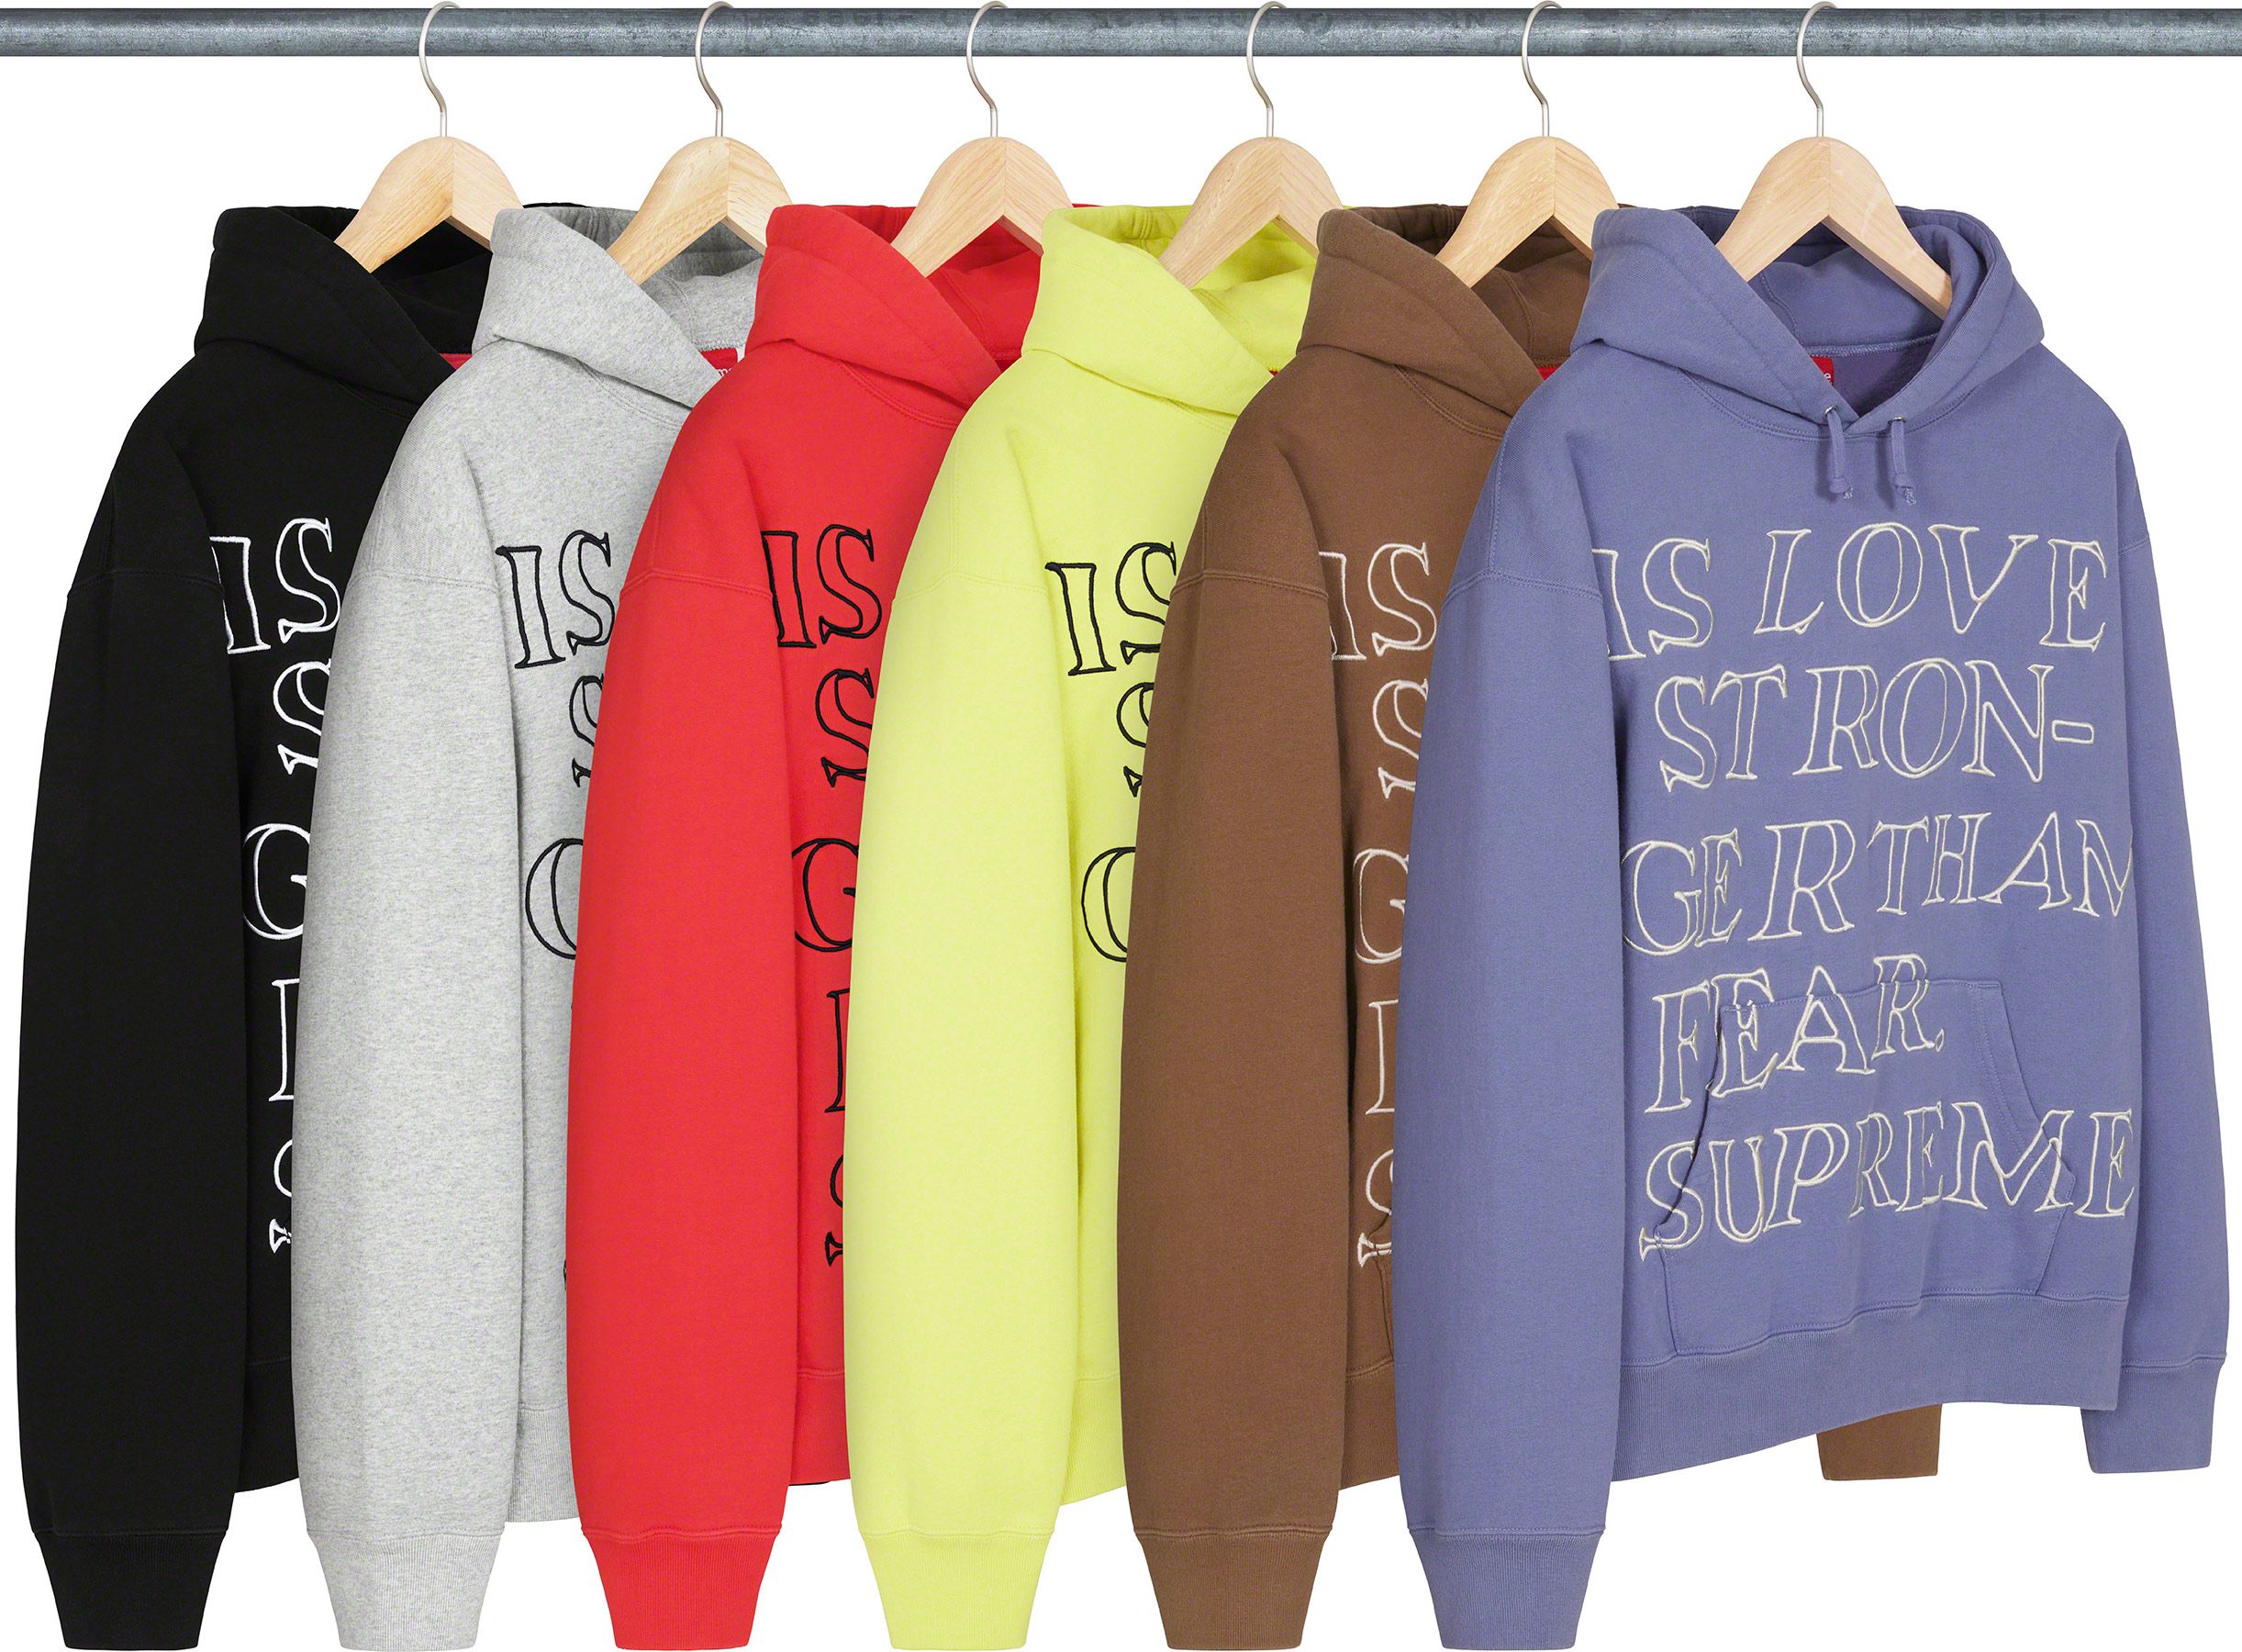 week3Supreme Stronger Than Fear Hooded パーカー